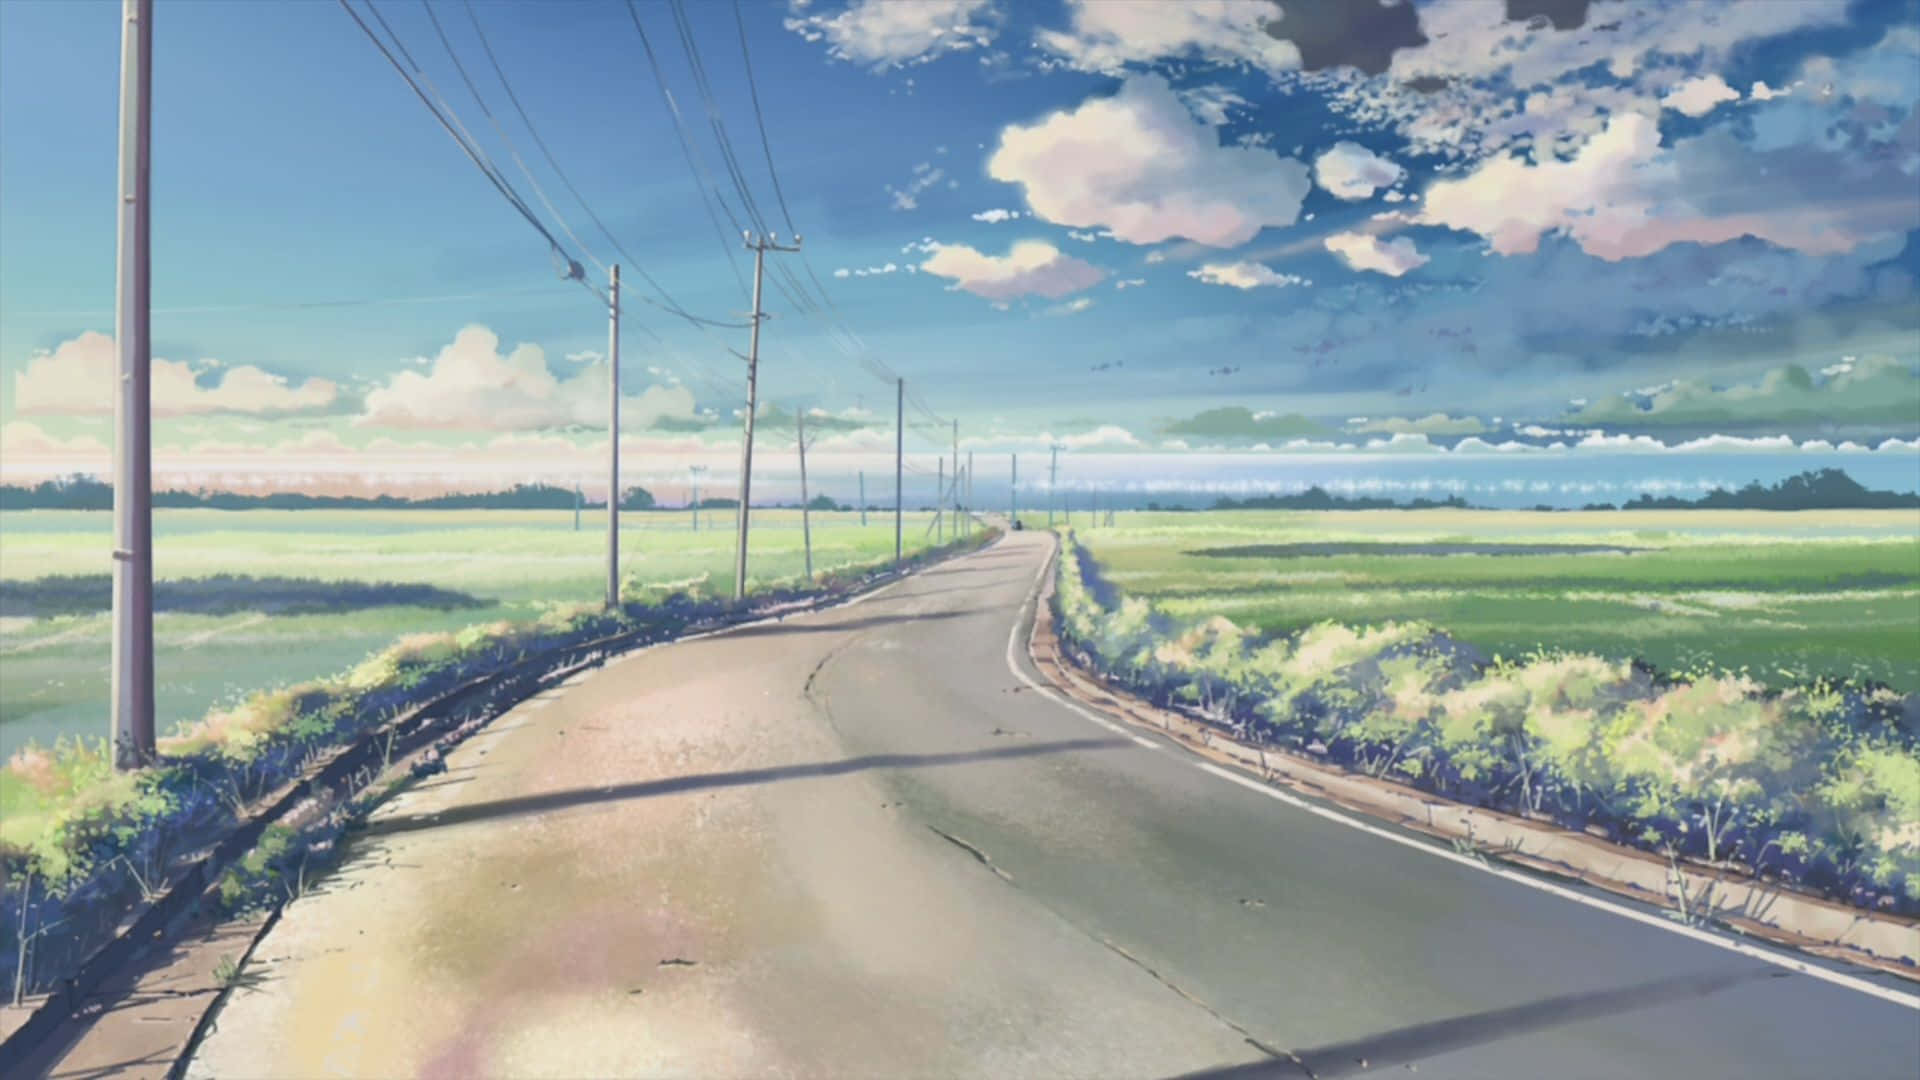 A Painting Of A Road With Power Lines And Clouds Wallpaper